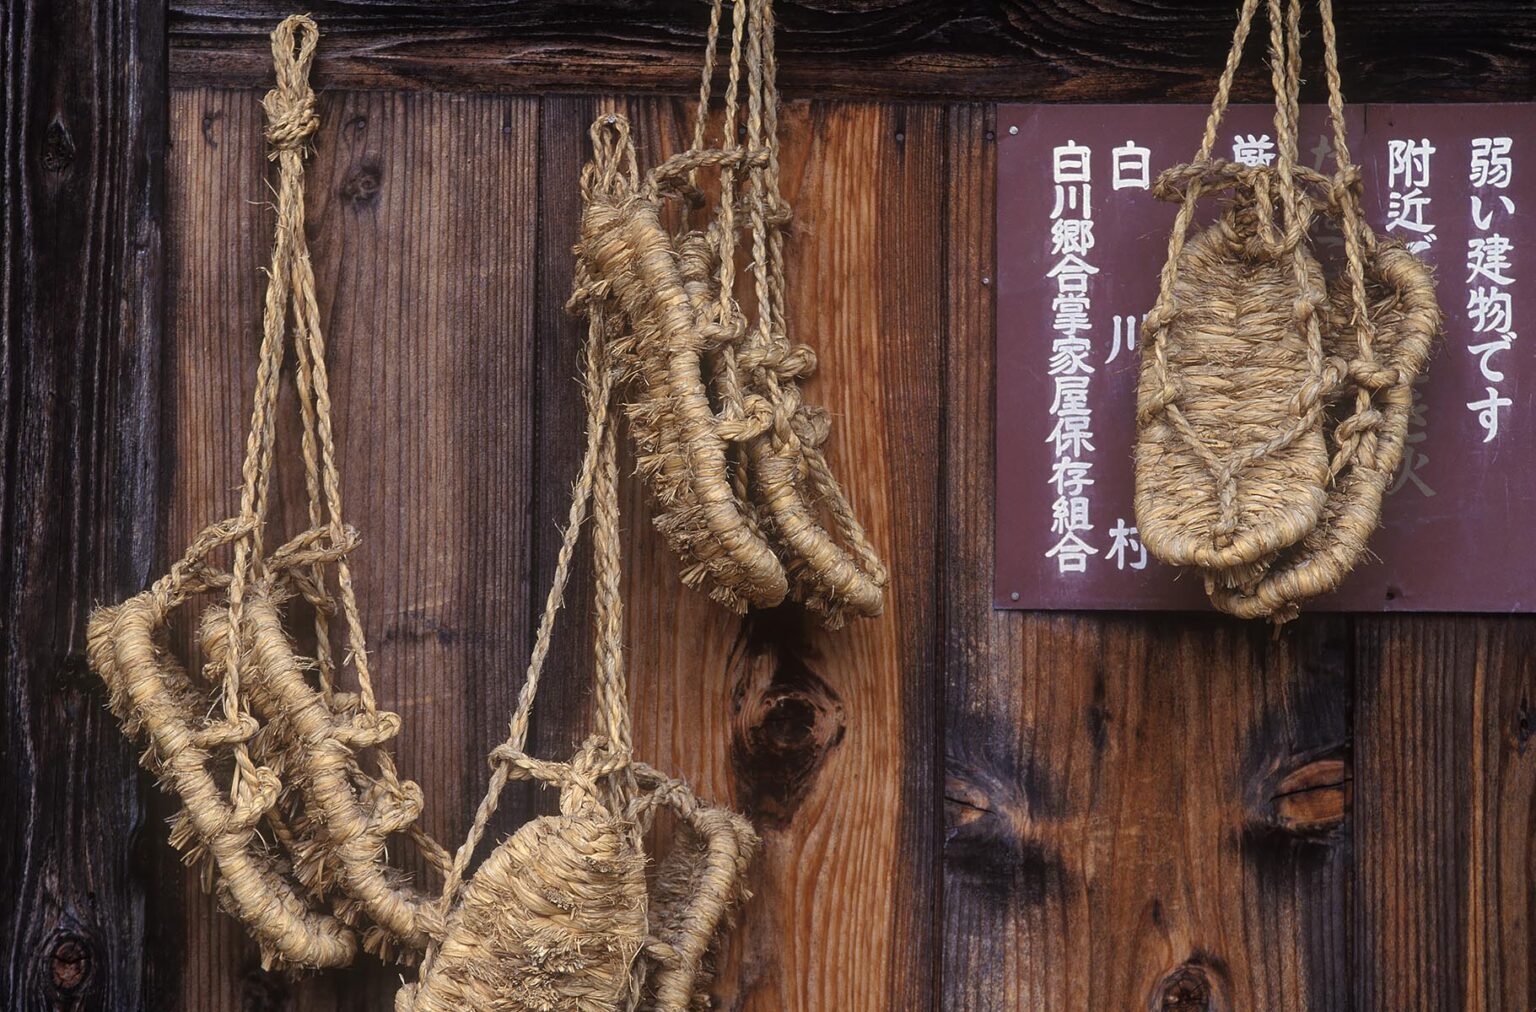 ZORI SANDALS hang on the wall of a RYOKAN in the MOUNTAIN VILLAGE of OGAMACHI, JAPAN